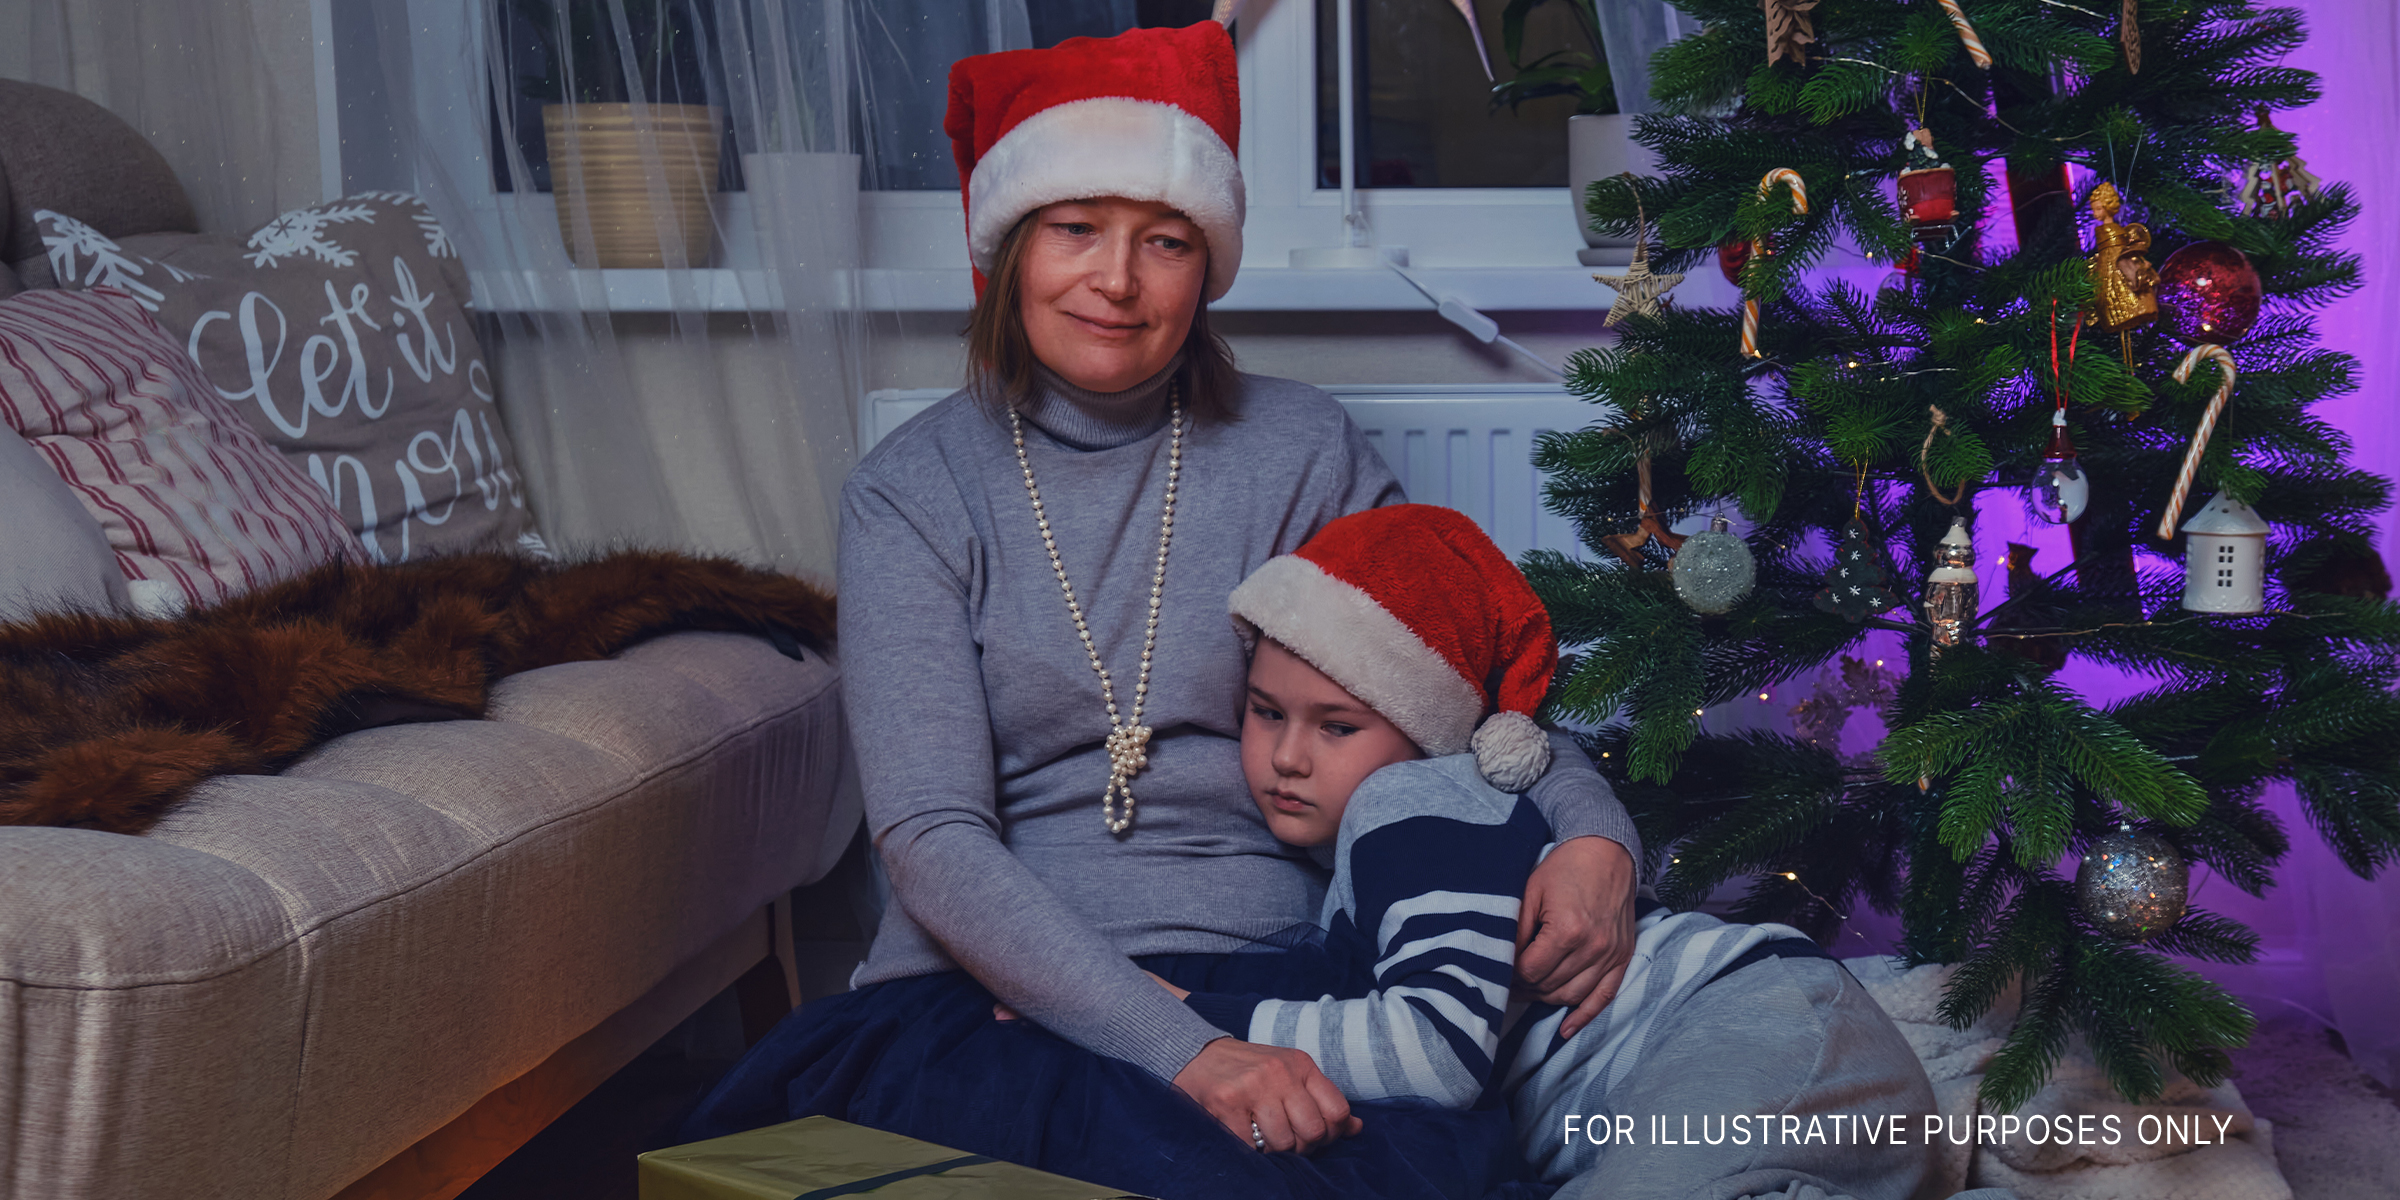 Sad mother and son sitting near the Christmas tree | Source: Getty Images